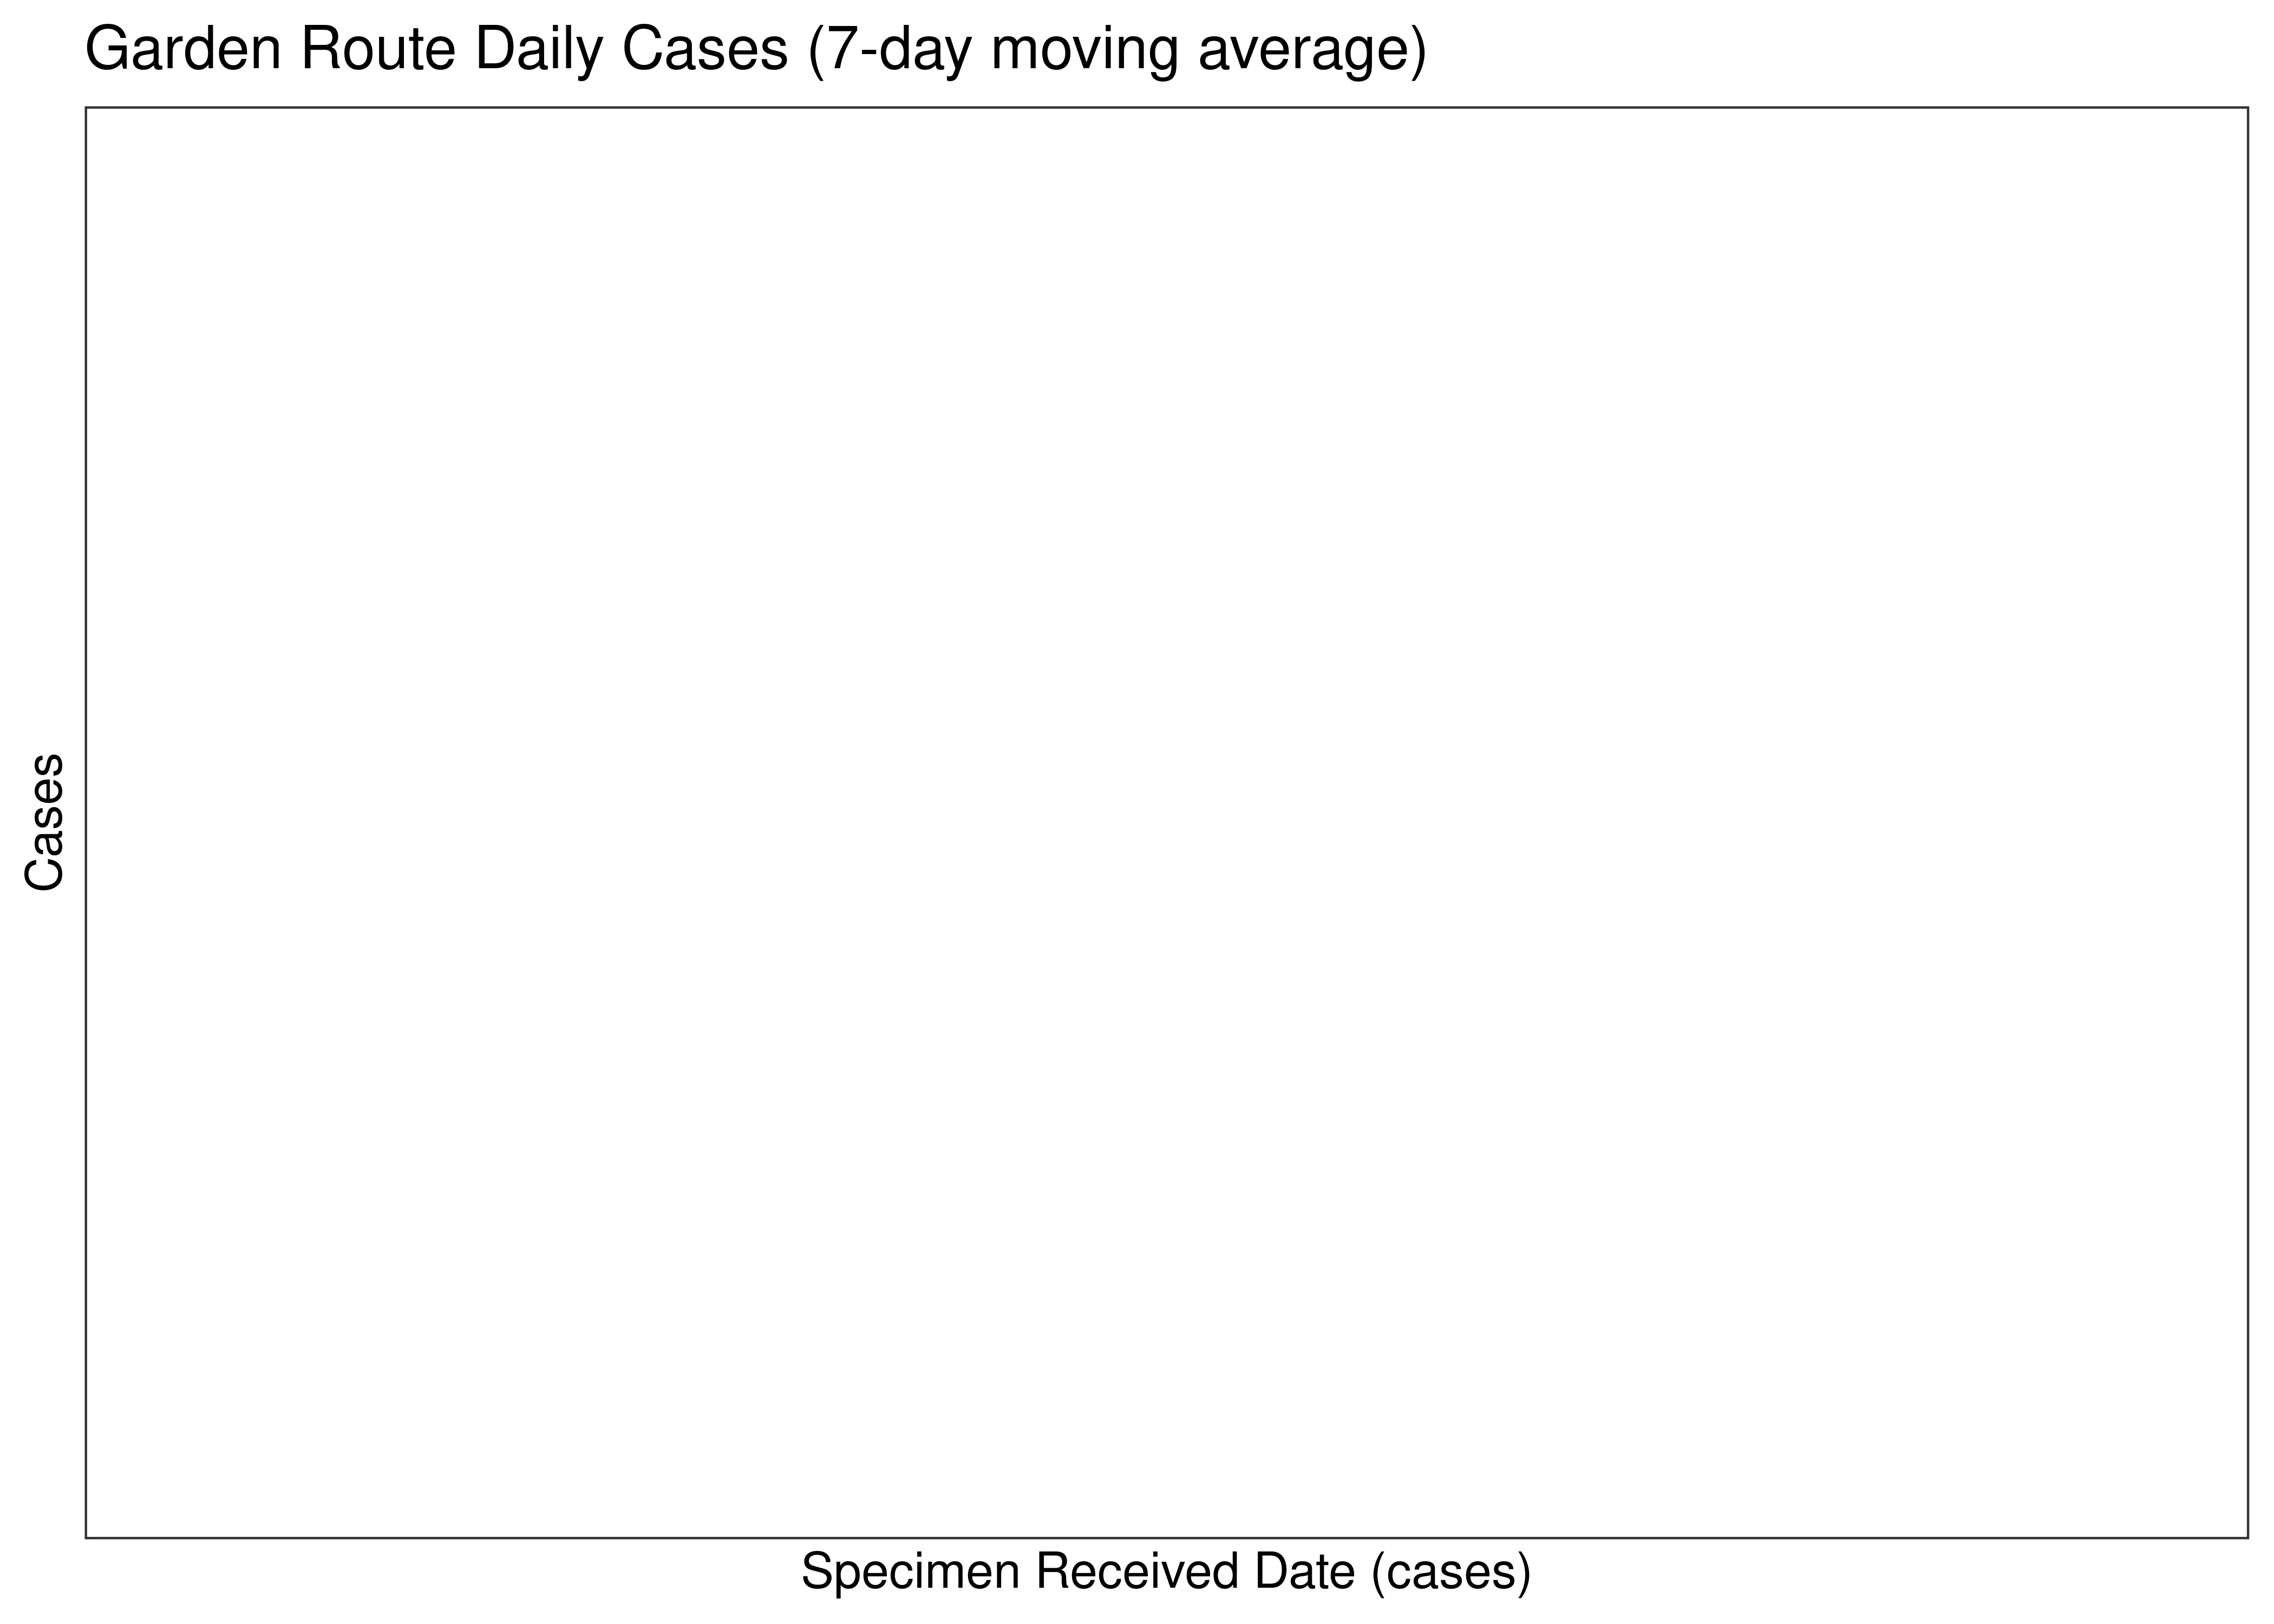 Garden Route Daily Cases for Last 30-days (7-day moving average)